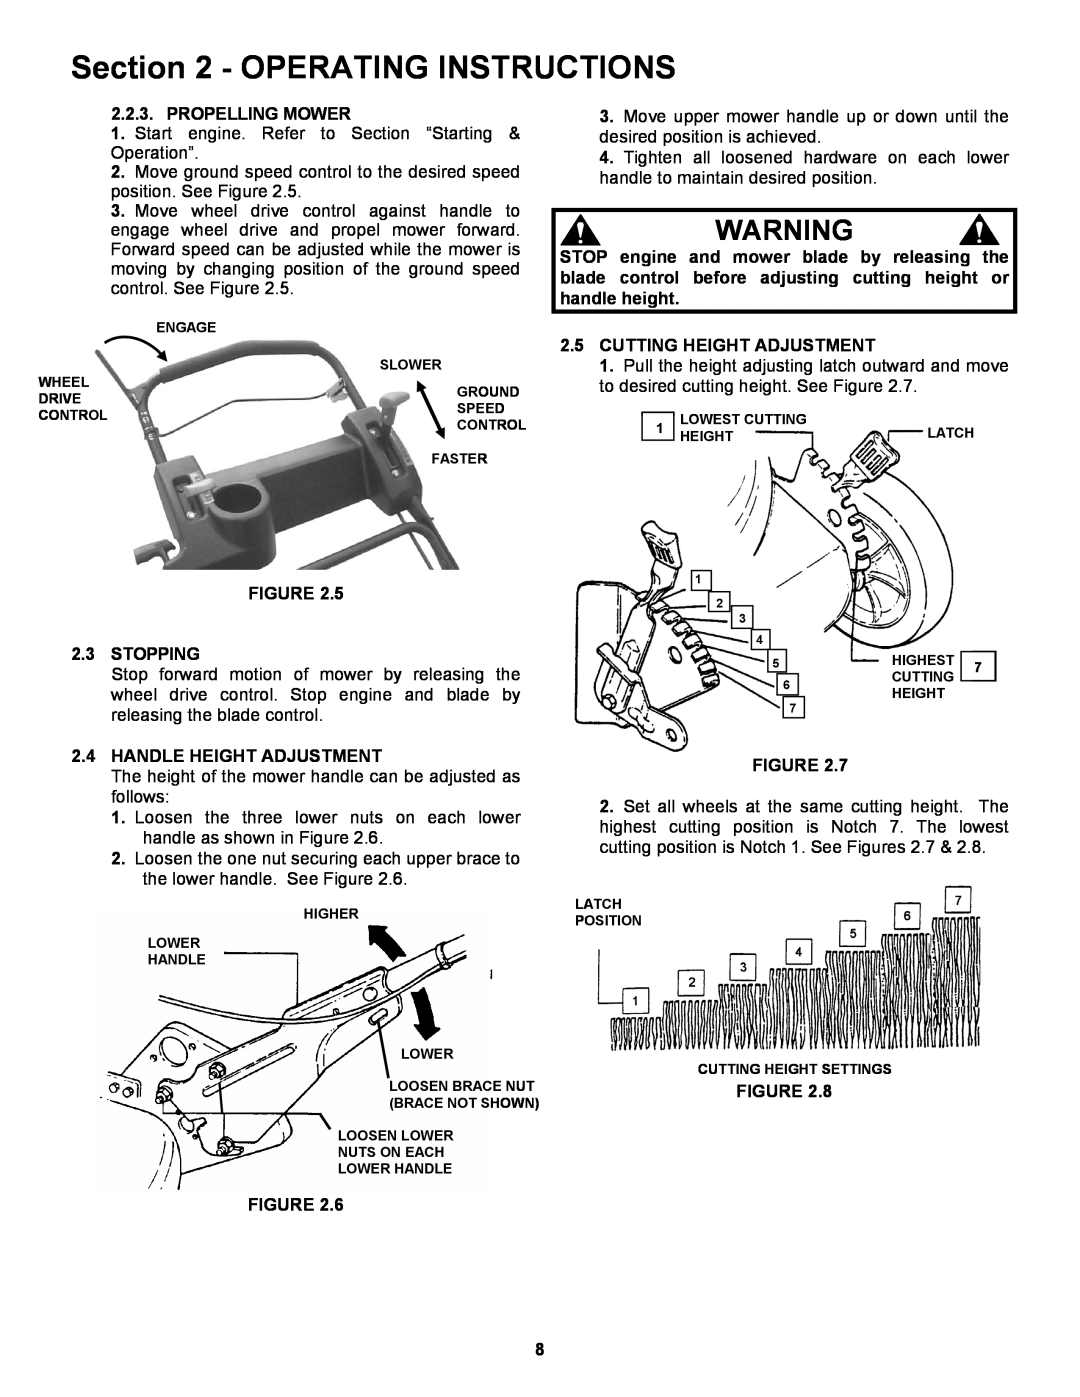 Snapper CRP216019KWV important safety instructions Operating Instructions, Propelling Mower 